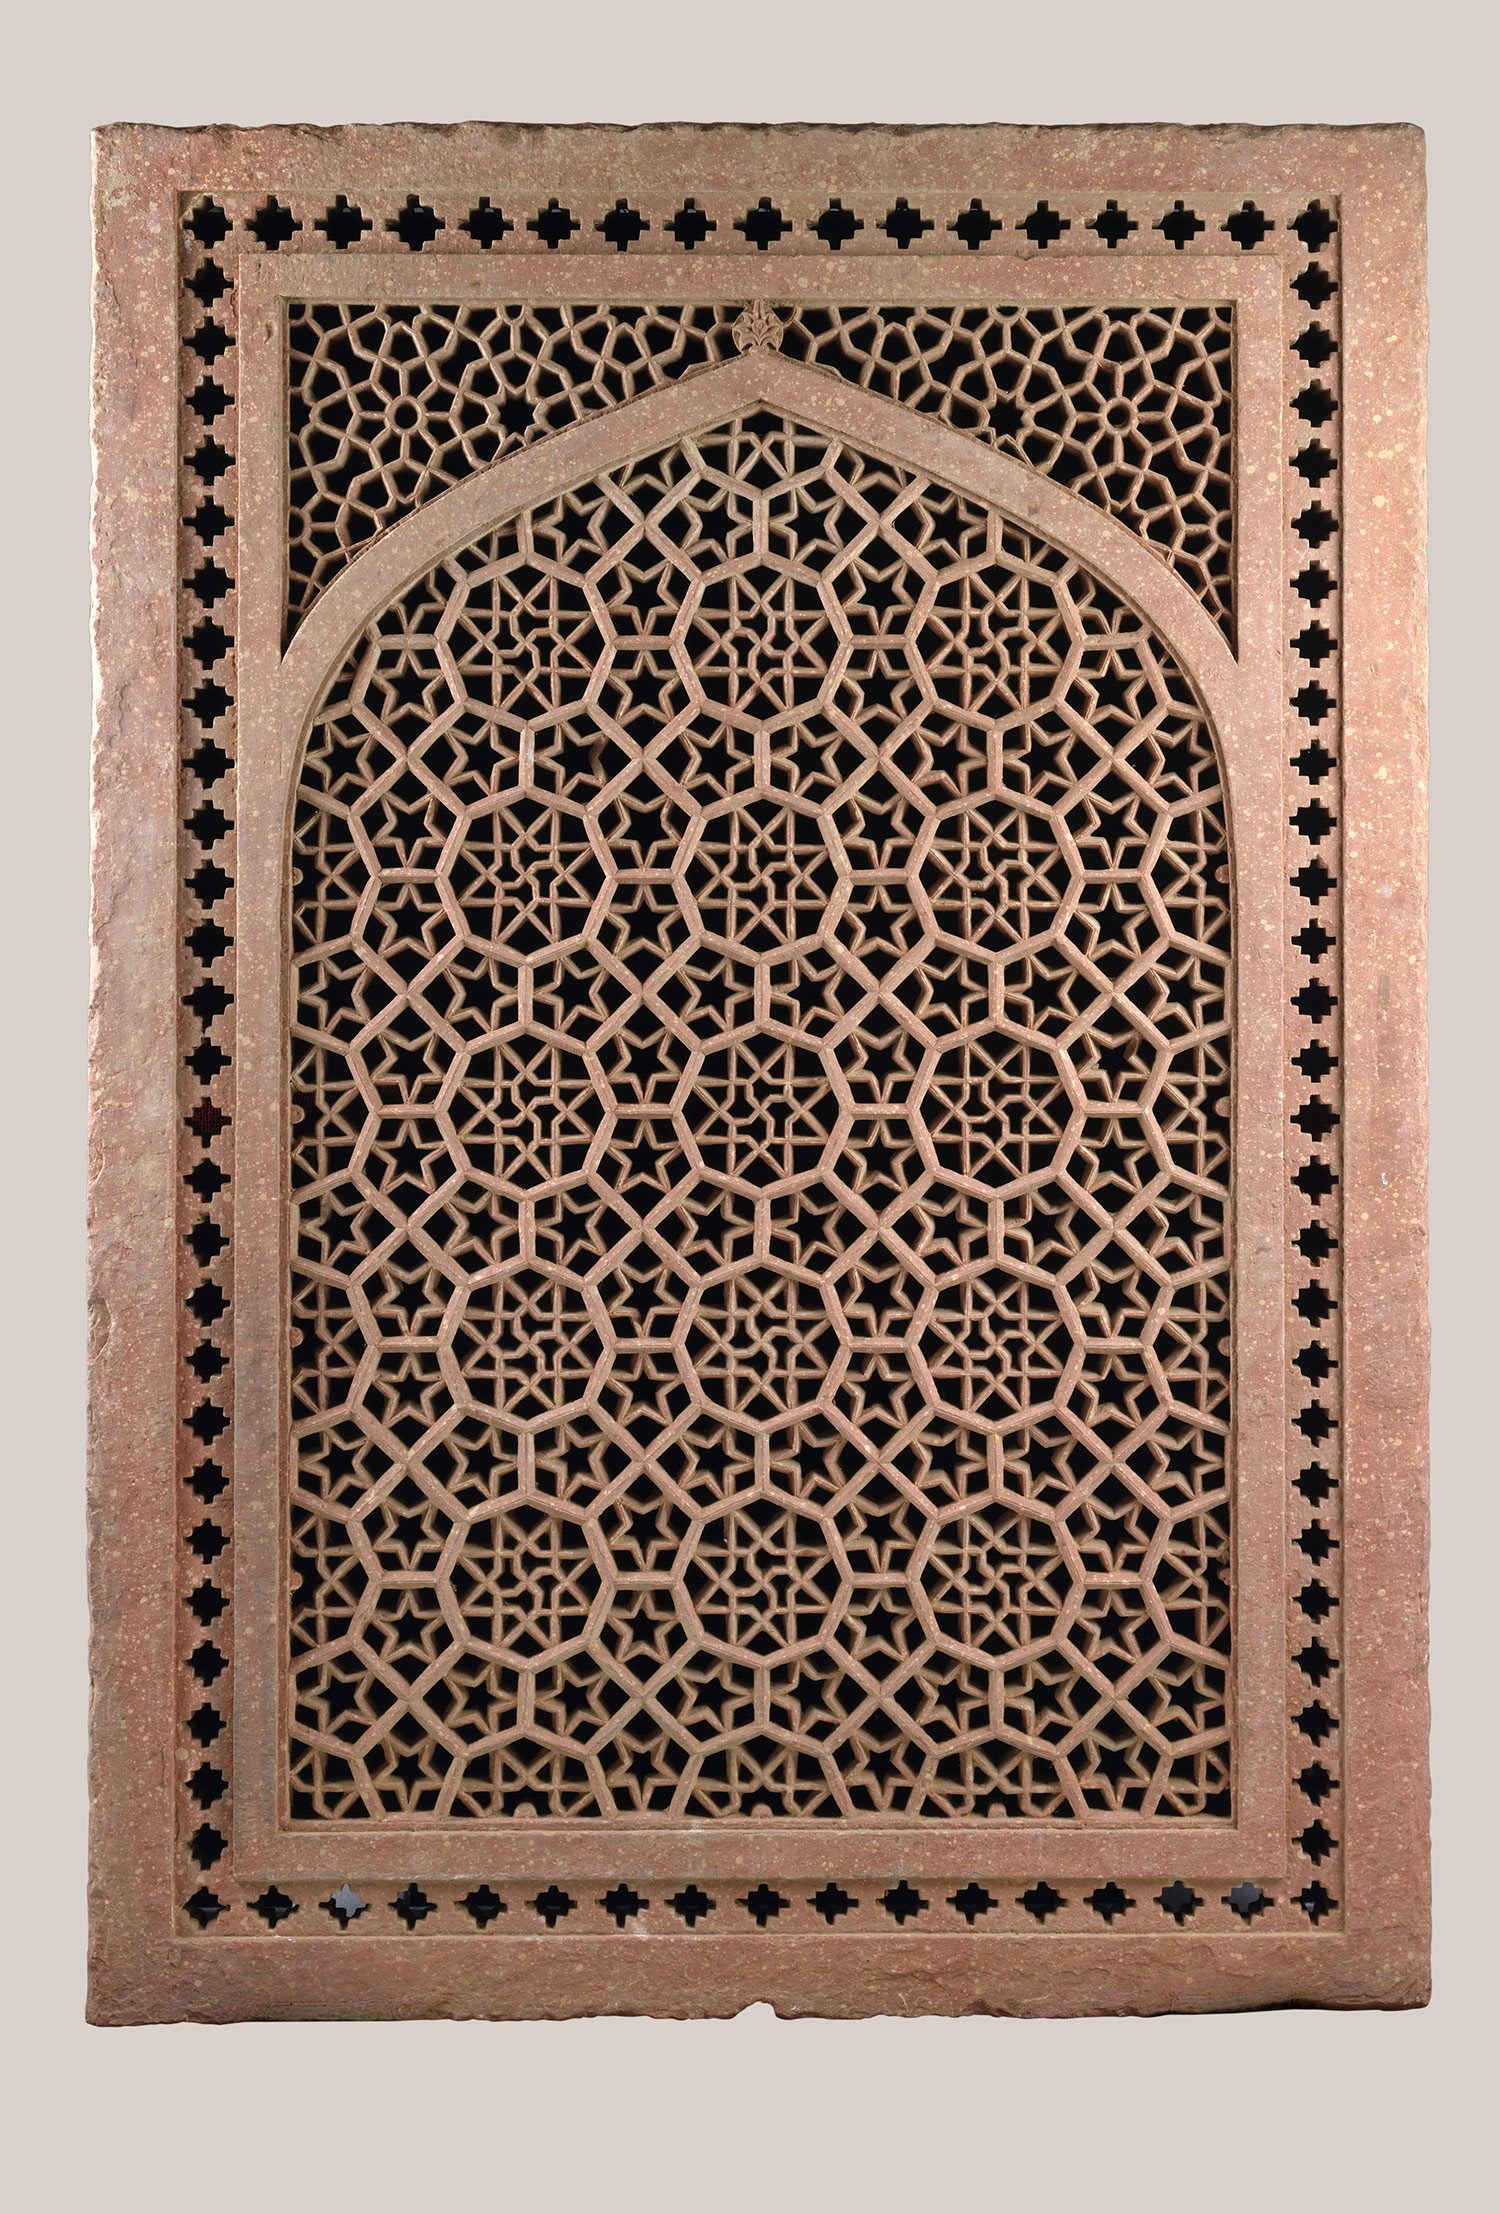 Jali screen (one of a pair) , second half of 16th century  